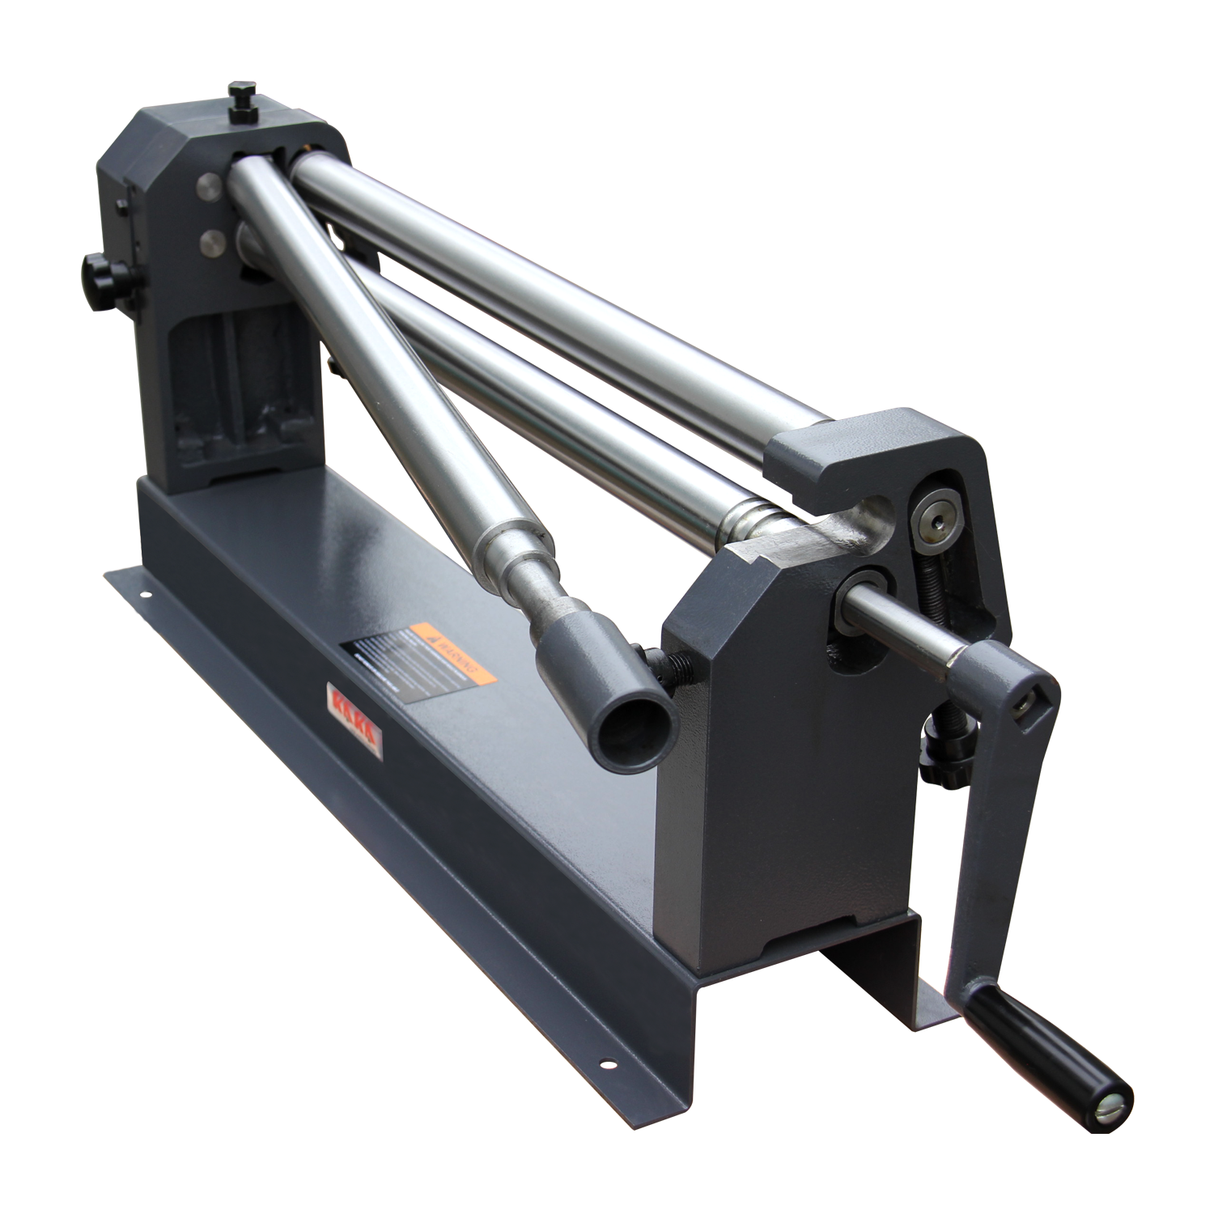 High Capacity and Efficiency: Our machine can effortlessly handle rebar cutting and bending tasks, making it perfect for construction and DIY projects. Plus, the two rollers with 3 wire-grooves allow for wire forming, adding to its versatility.